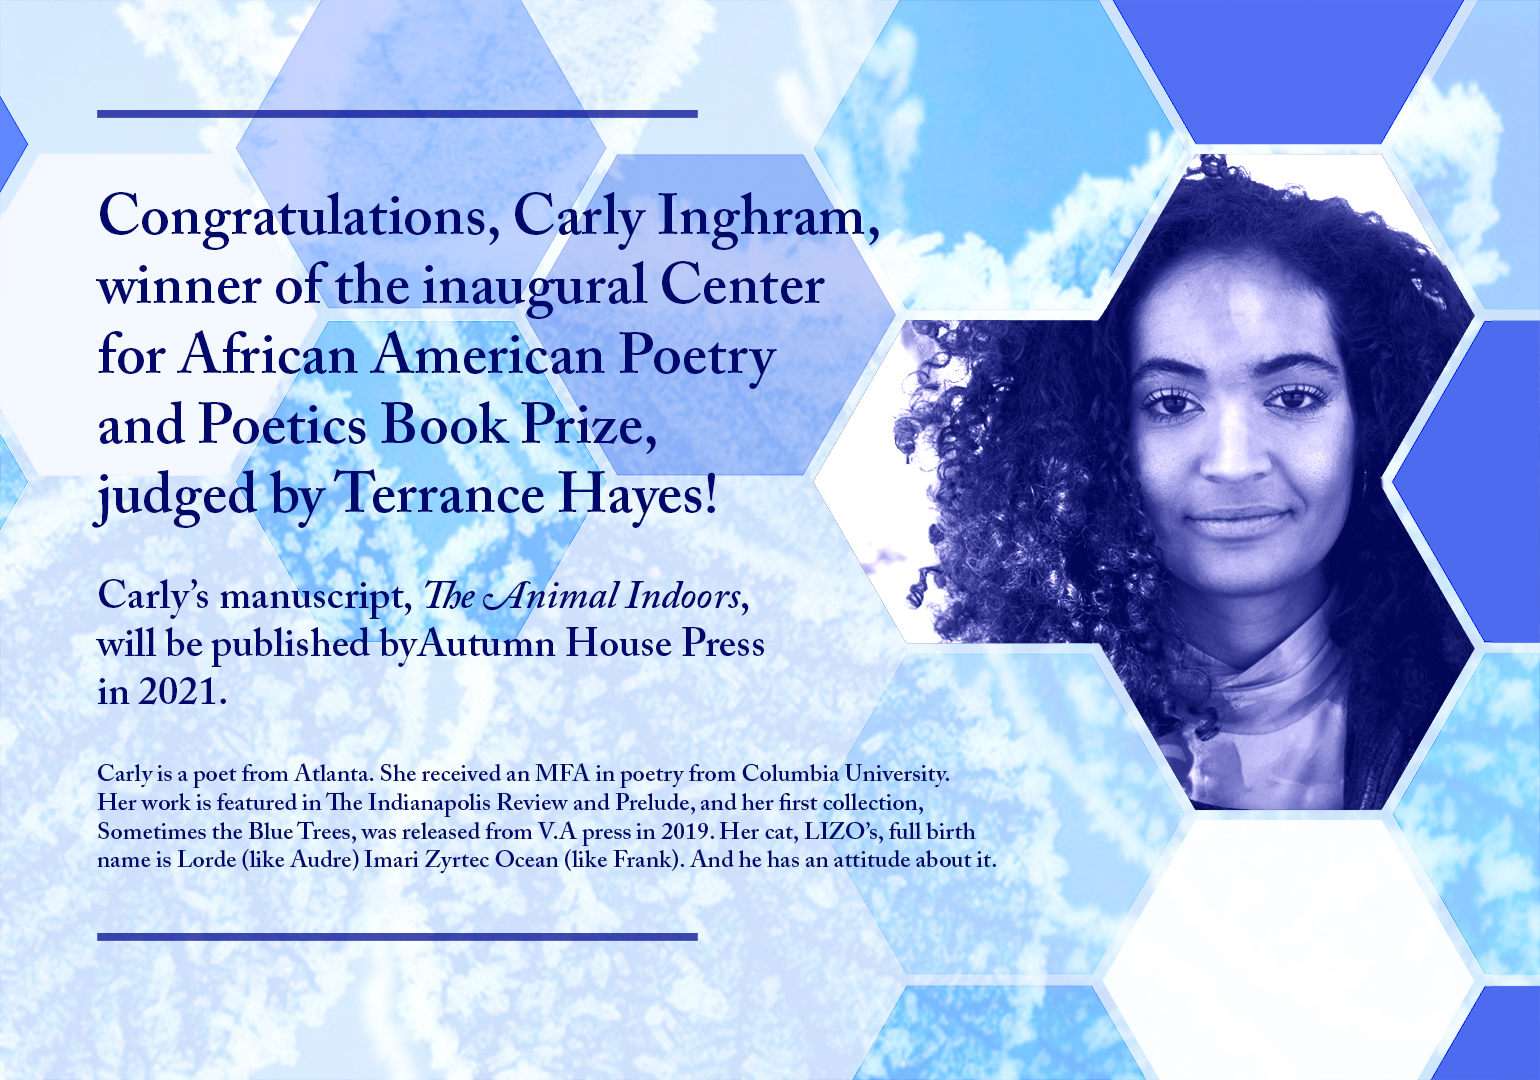 Photo of Carly Inghram with text: "Congratulations" + winning information repeated. More text: "Carly is a poet from Atlanta. She received an MFA in poetry from Columbia University. Her work is featured in The Indianapolis Review and Prelude, and her first collection, Sometimes the Blue Trees, was released from V.A press in 2019. Her cat, LIZO's, full birth name is Lorde (like Audre), Imari Zyrtec Ocean (like Frank). And he has an attitude about it."